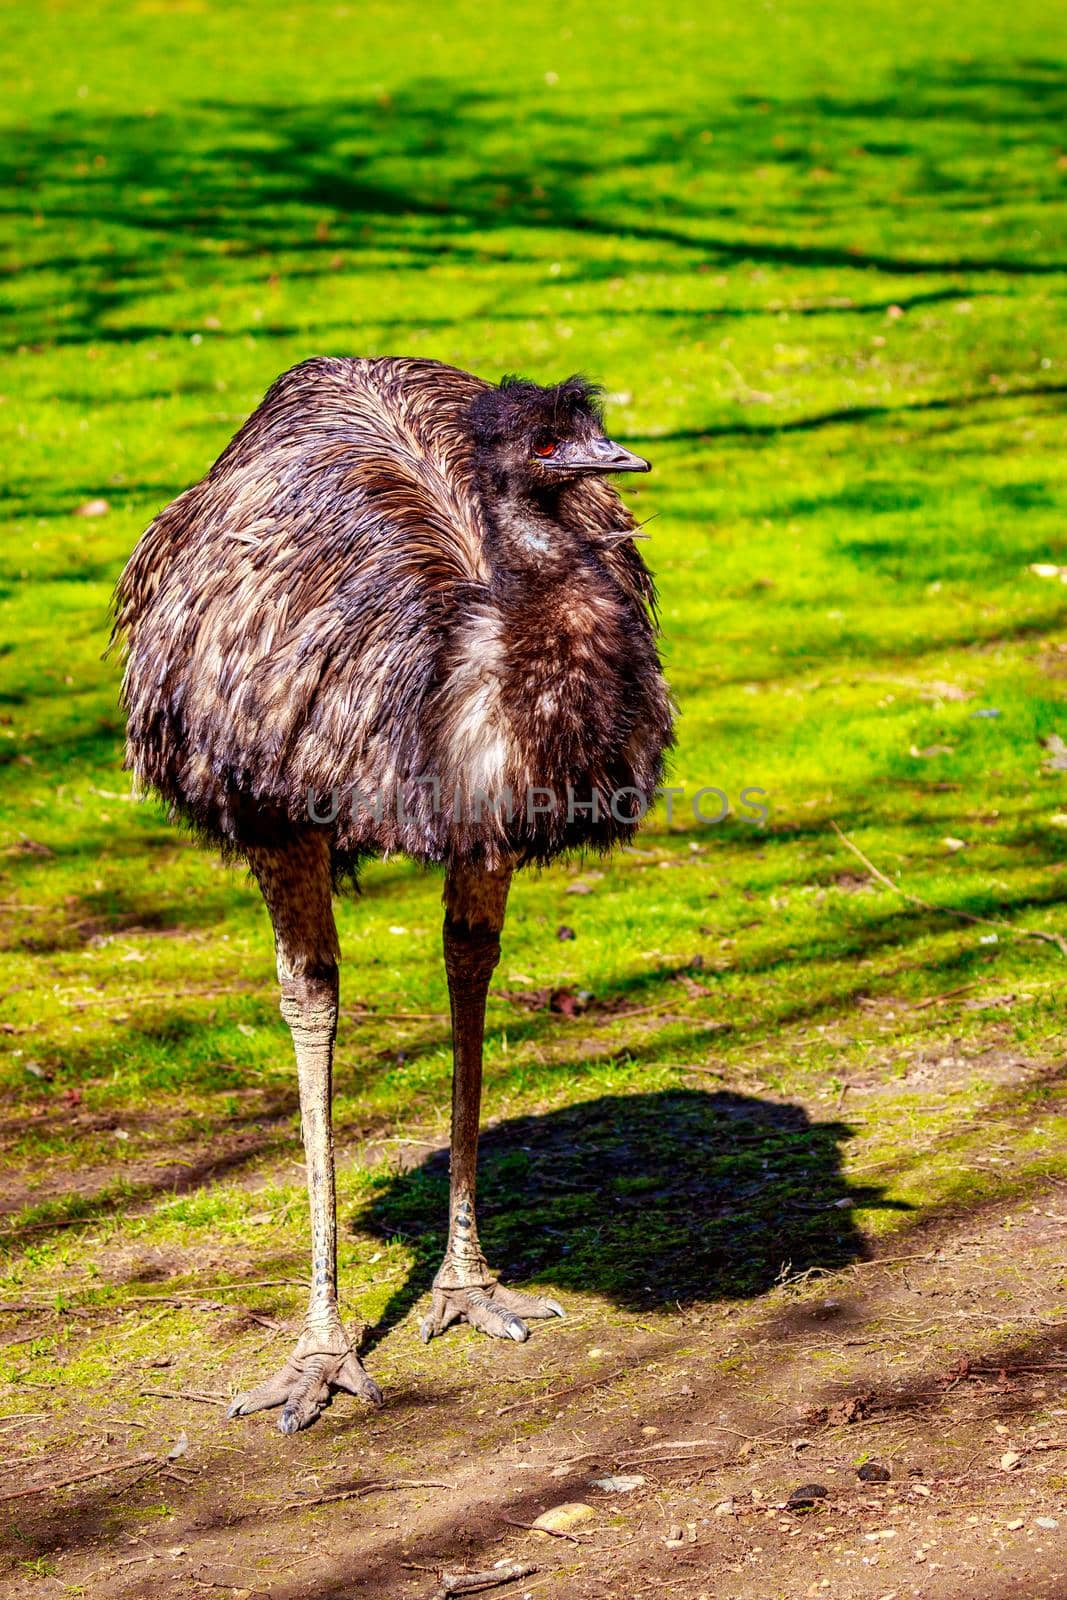 An emu stands on the meadow, on alert.